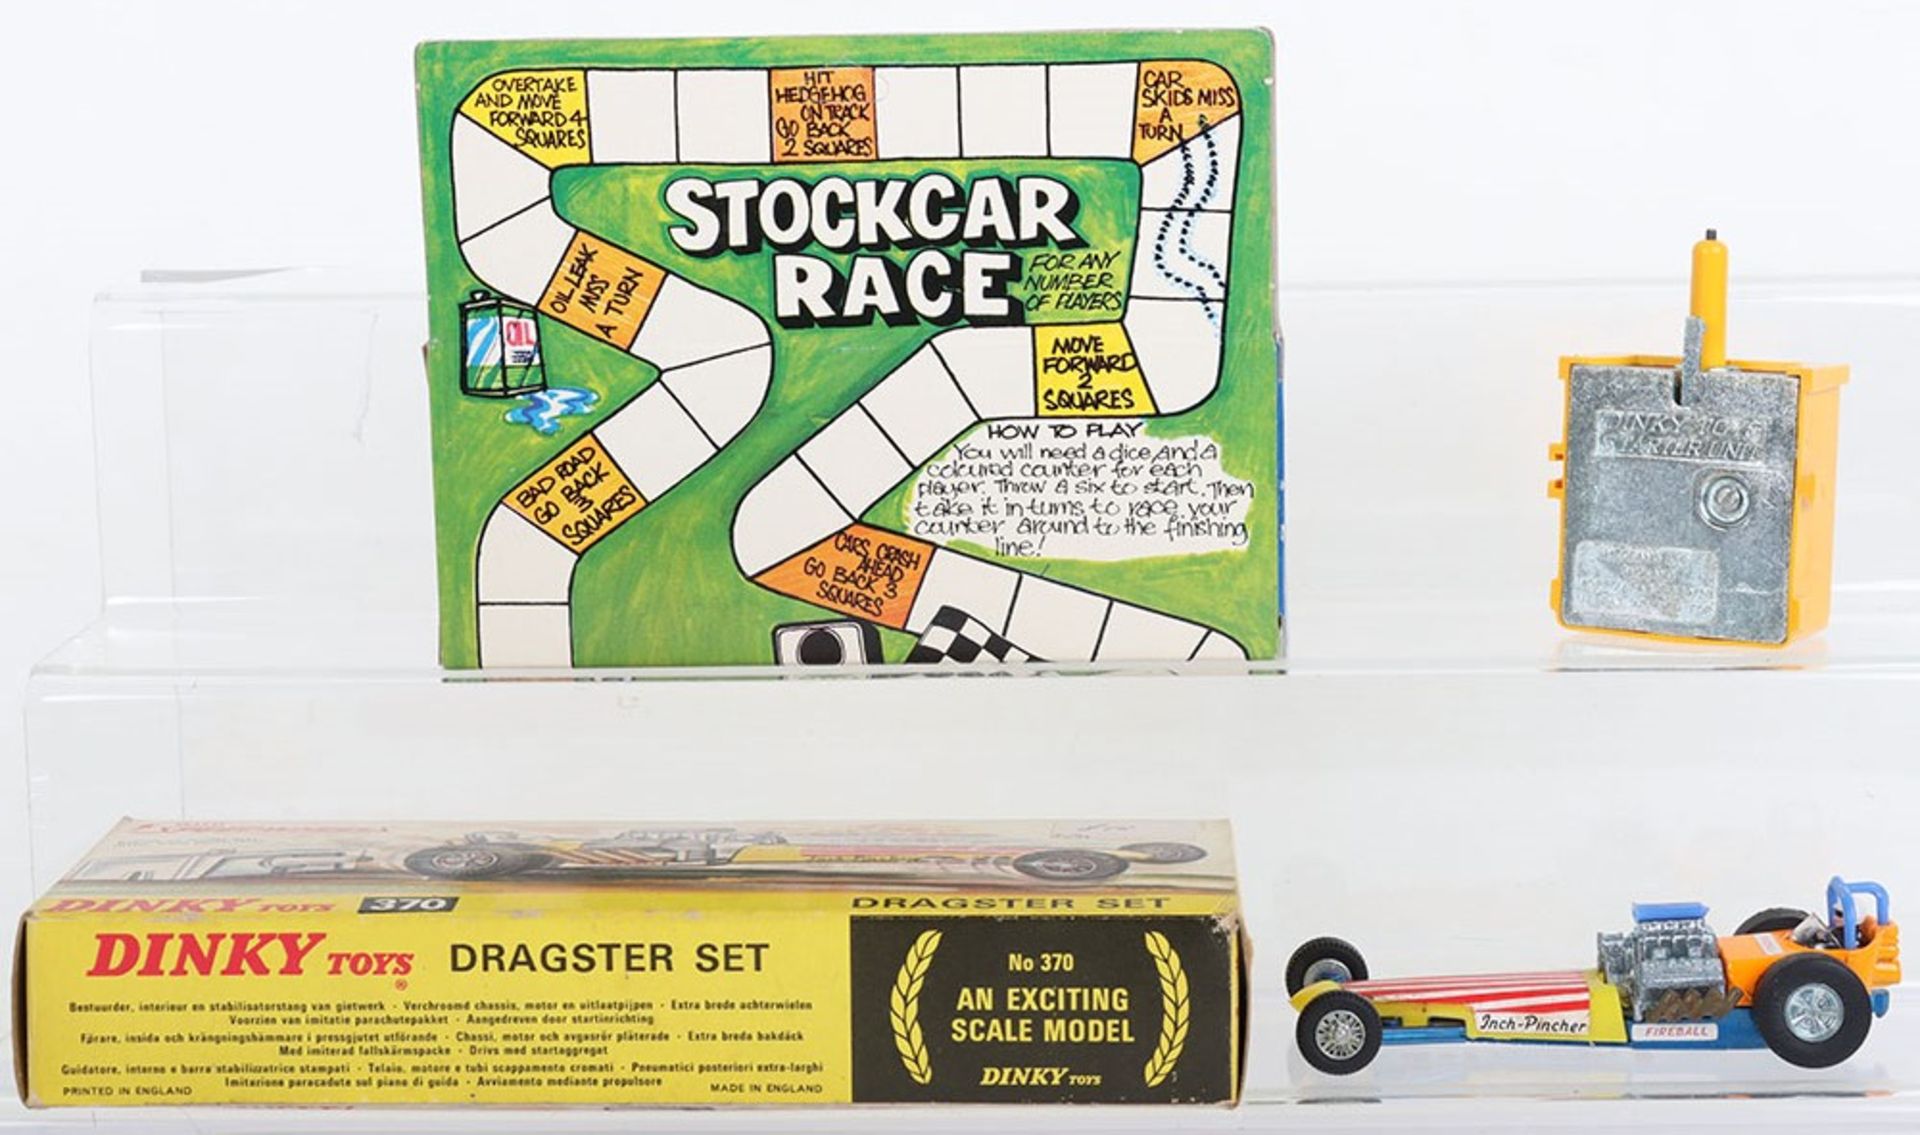 Dinky Toys 370 Dragster Set - Image 3 of 3